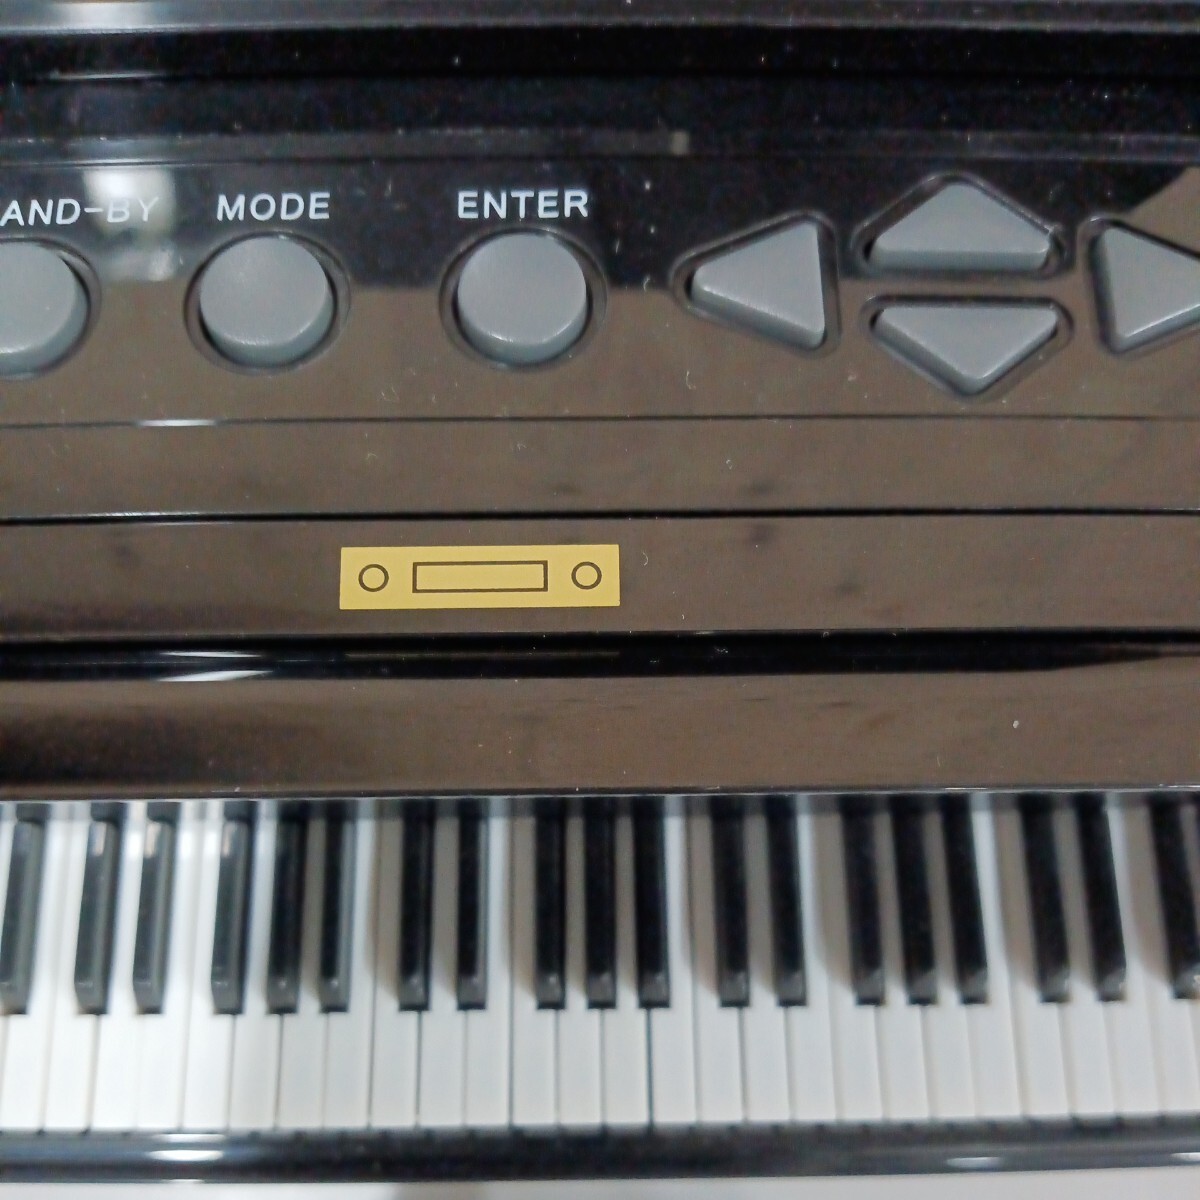 SEGA TOYS Sega toys Grans Pianist Grand Pianist piano automatic musical performance start-up verification settled secondhand goods box, instructions equipped 